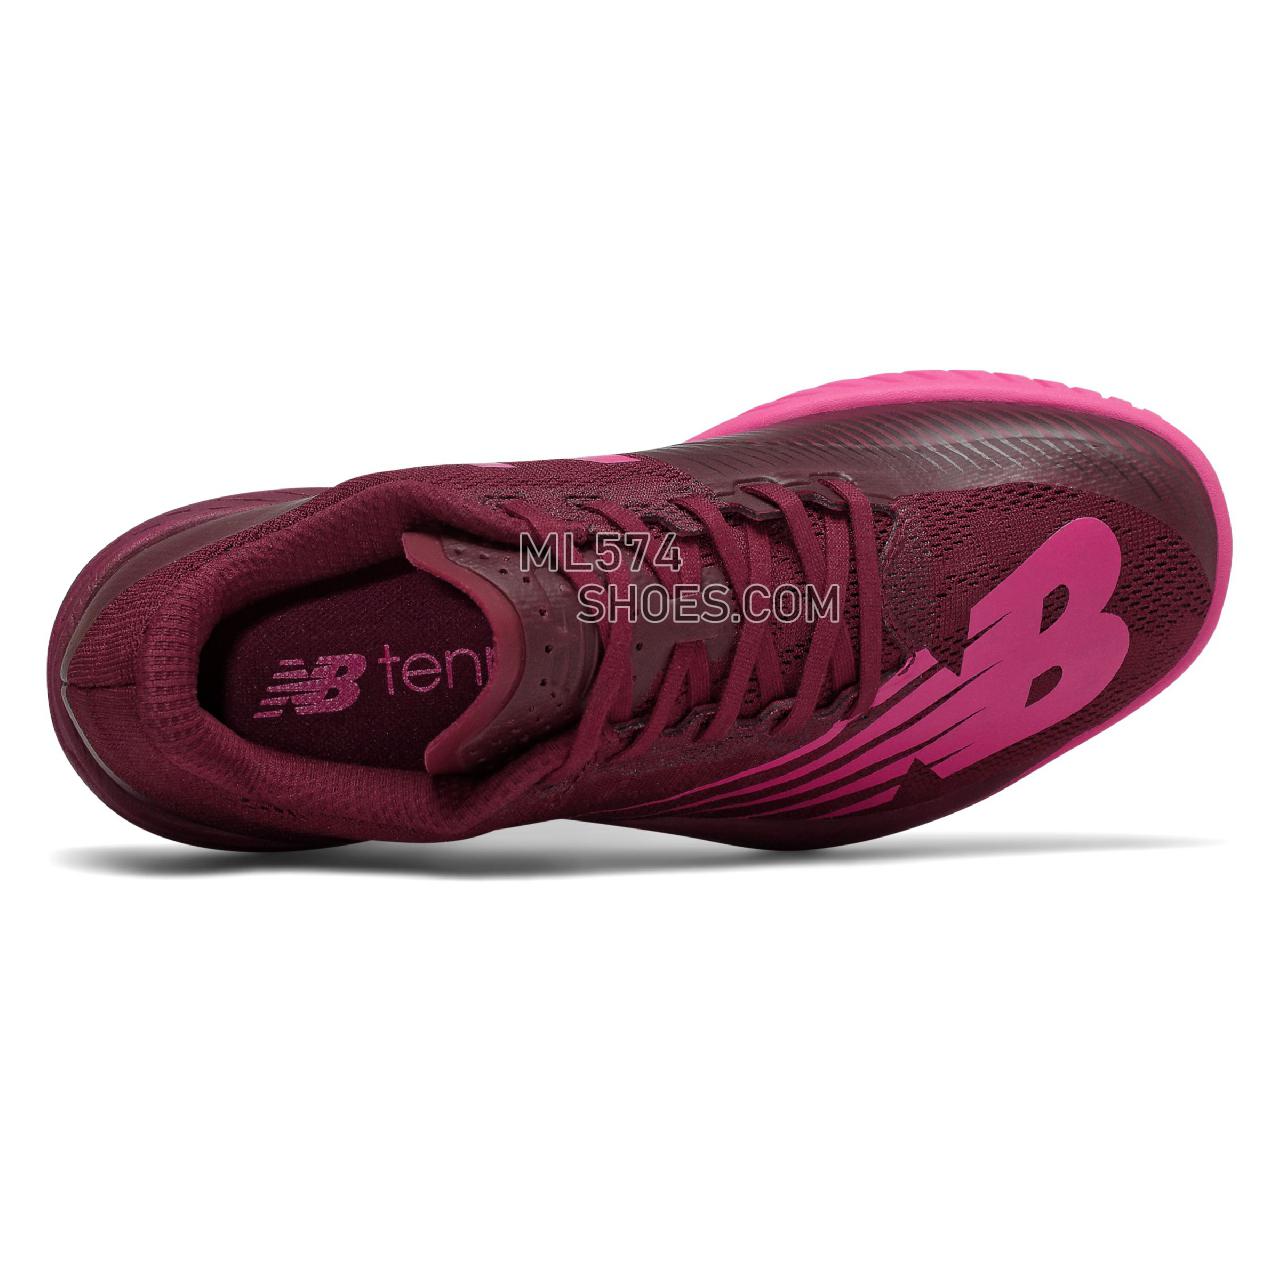 New Balance 896v3 - Women's Tennis - Burgundy with Vivid Coral - WCH896P3